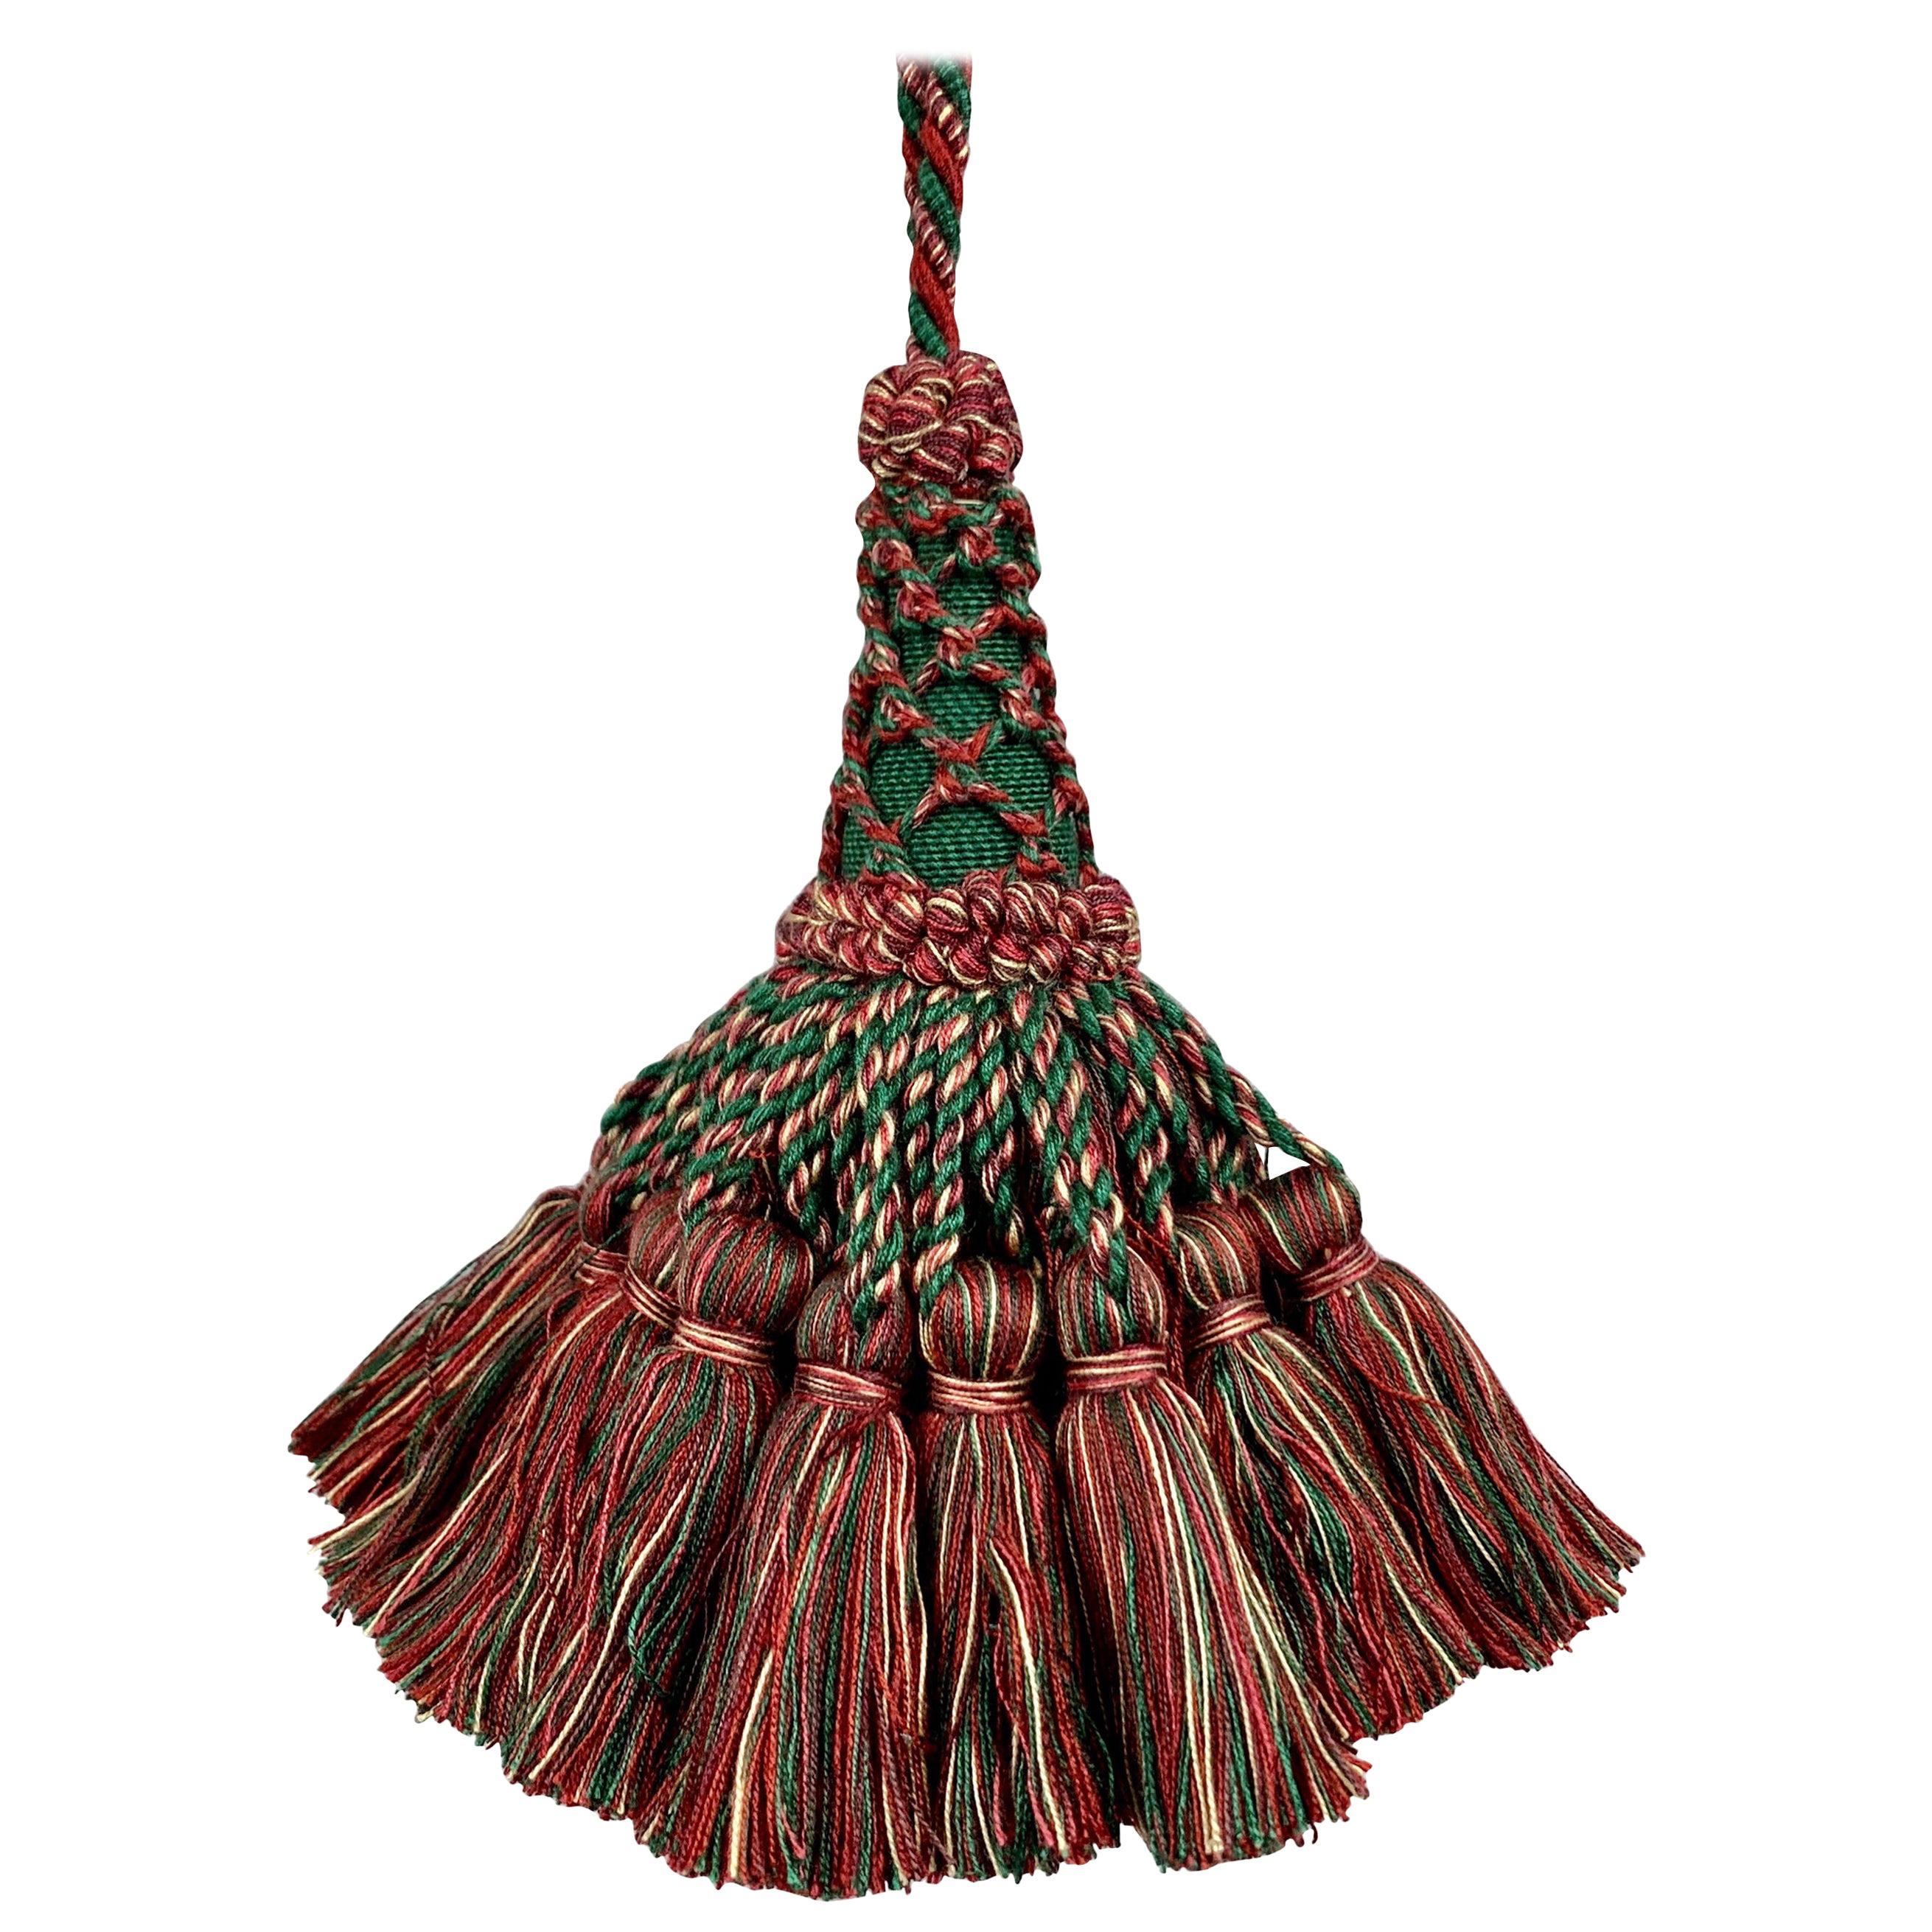 Houlés Passementerie Key Tassel or Gland Cle in Red/Green, Paris